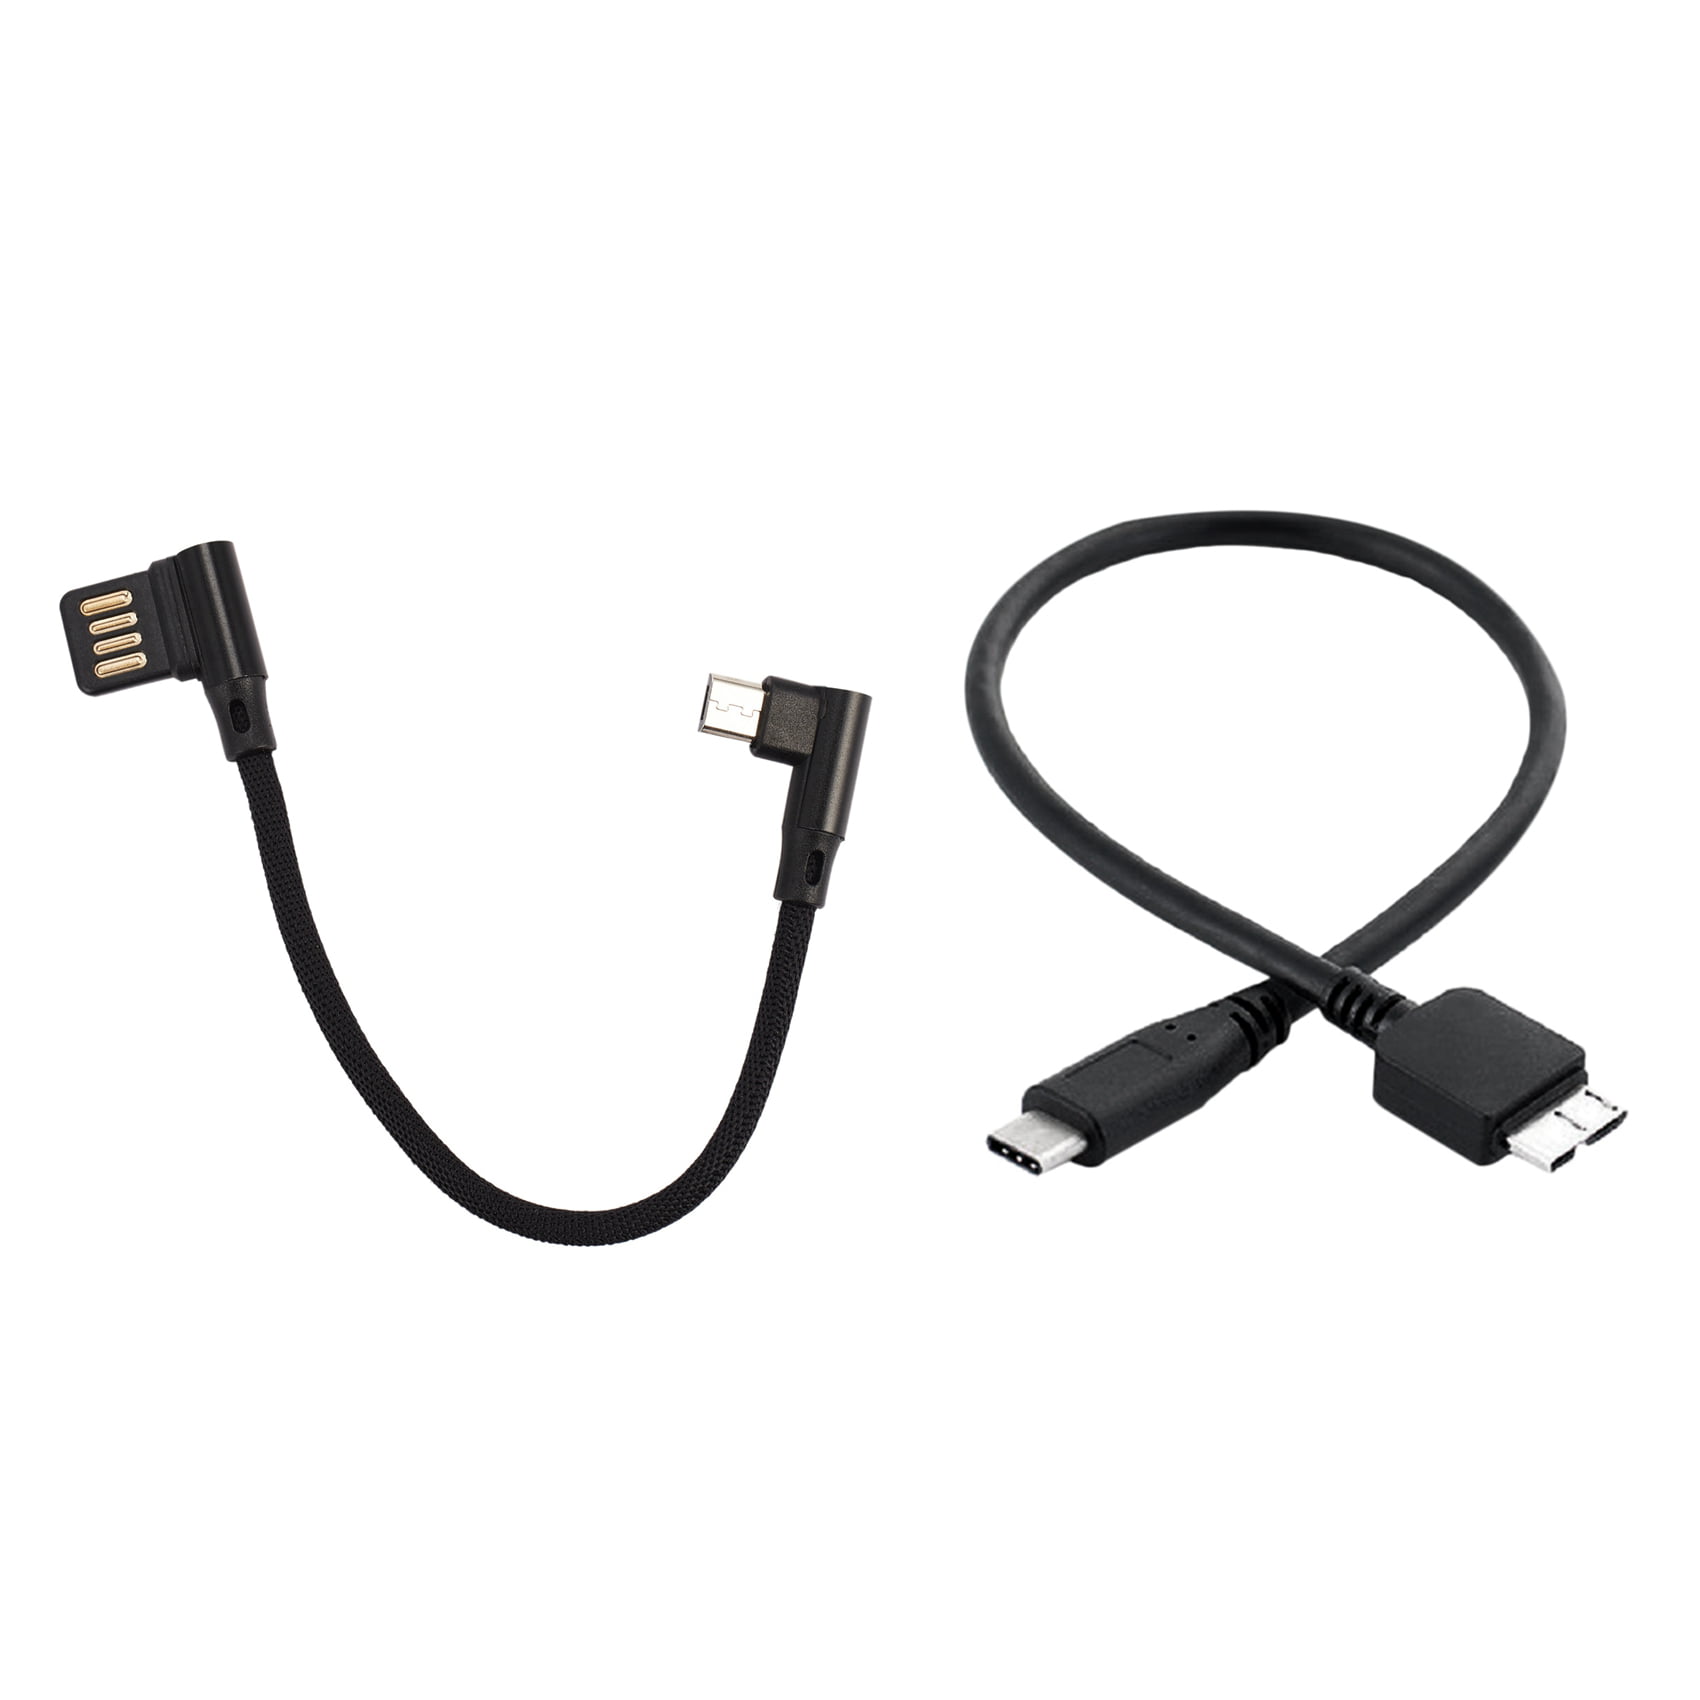 for Hard Drives Etc 6ft USB-C Male to USB 3.0 Micro-USB B Male Cable 